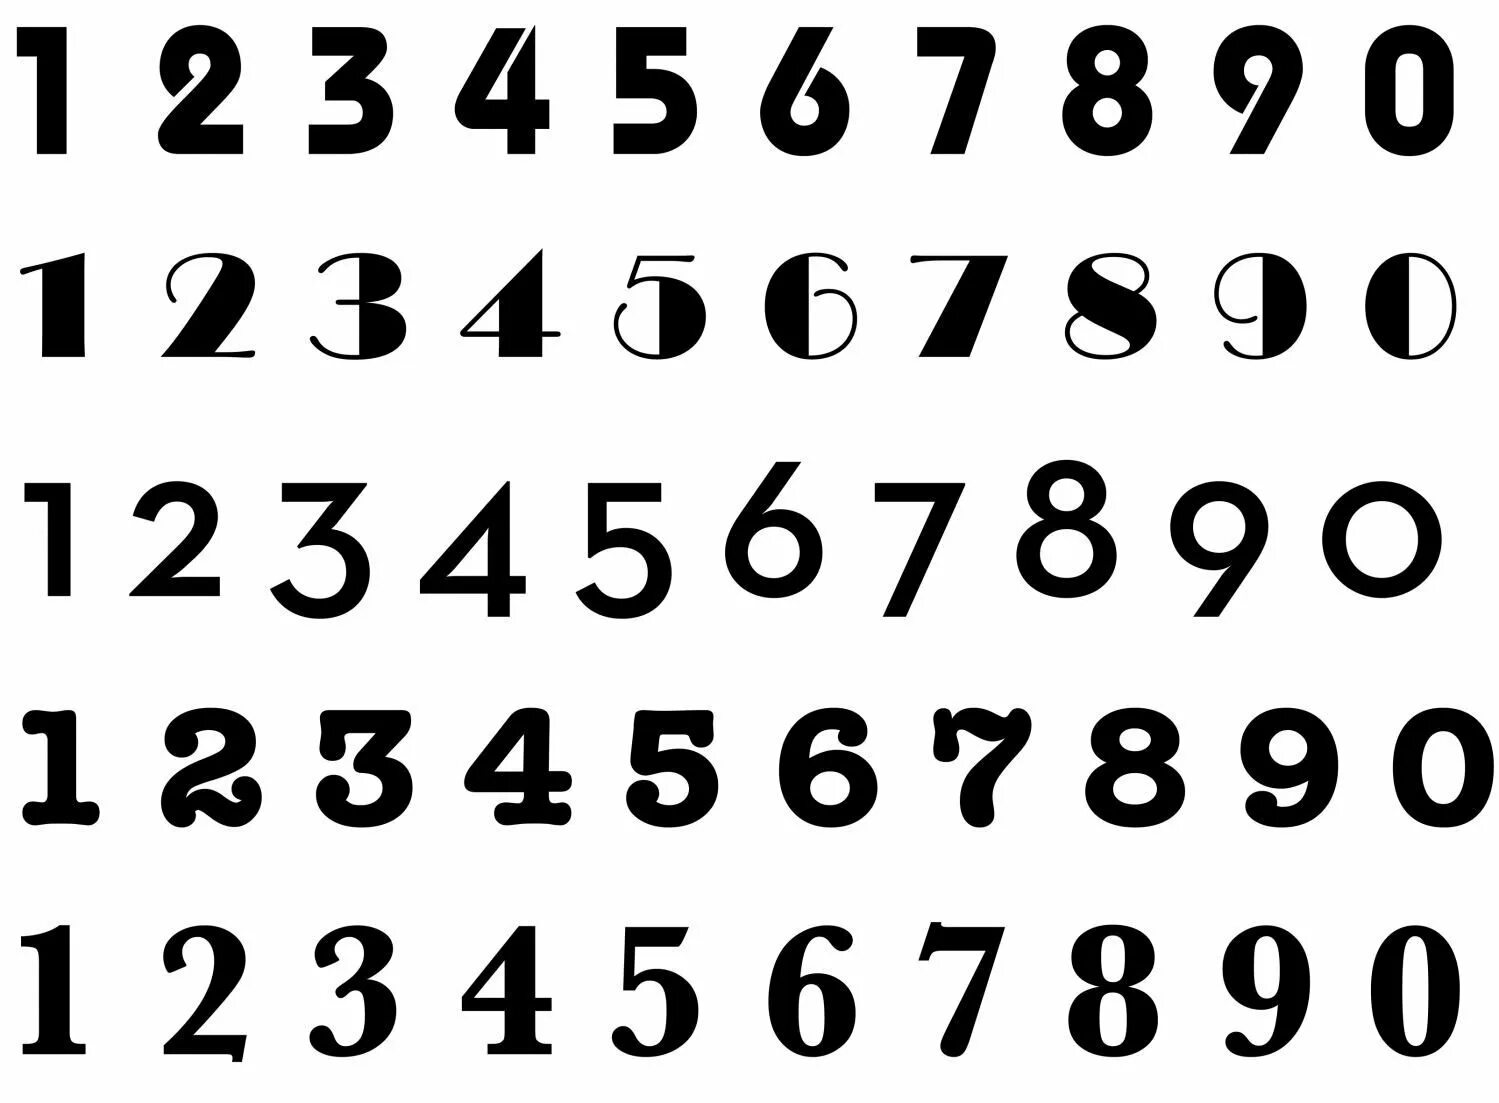 Numbers fonts. Шрифты цифр. Красивые цифры. Красивые цифры шрифт. Трафарет "цифры".